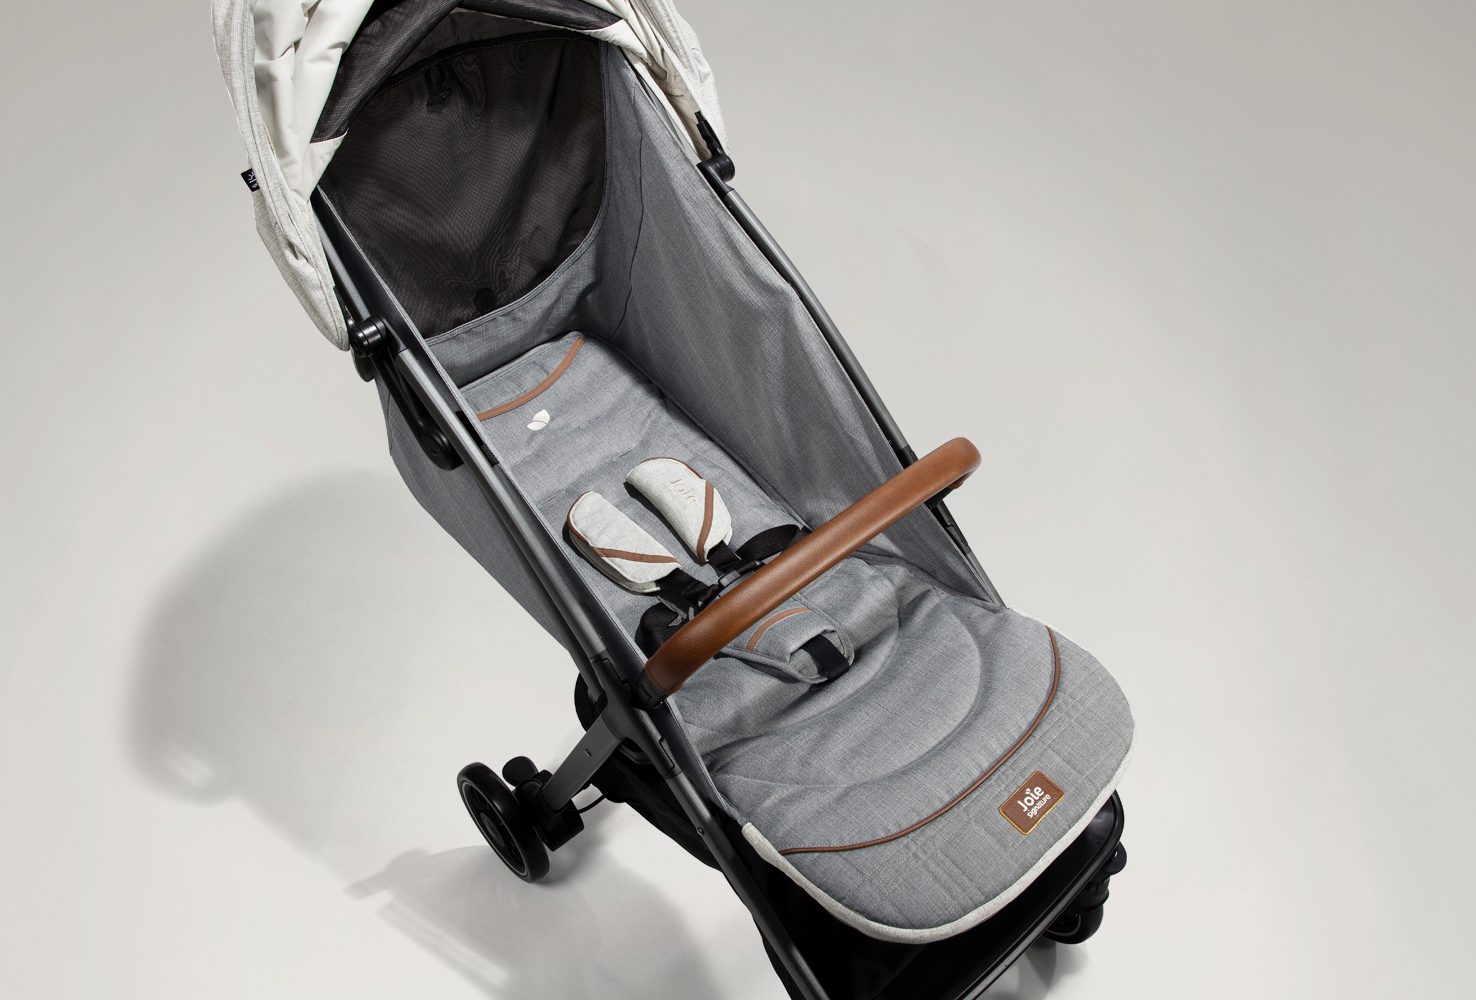 Overhead view of the Joie Parcel pushchair fully reclined with the canopy retracted